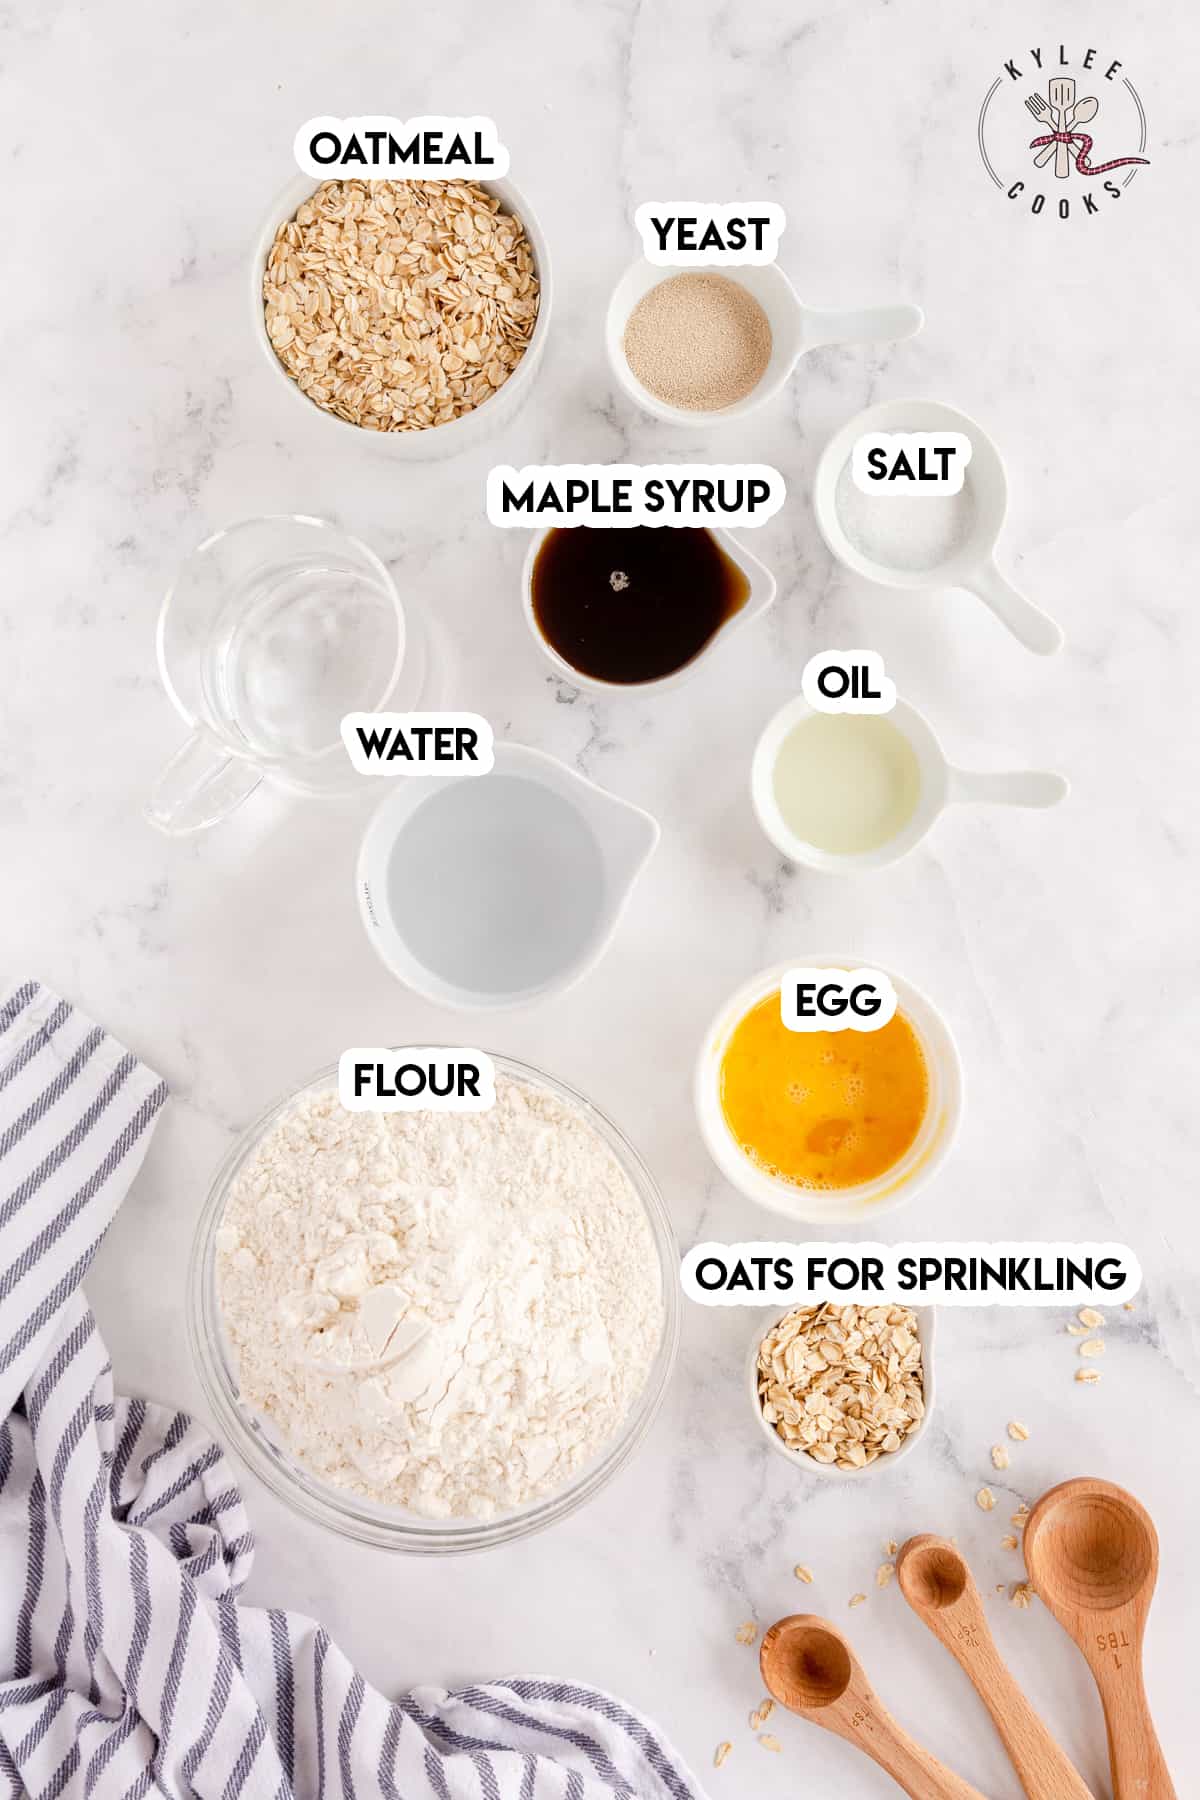 ingredients to make oatmeal bread laid out and labeled